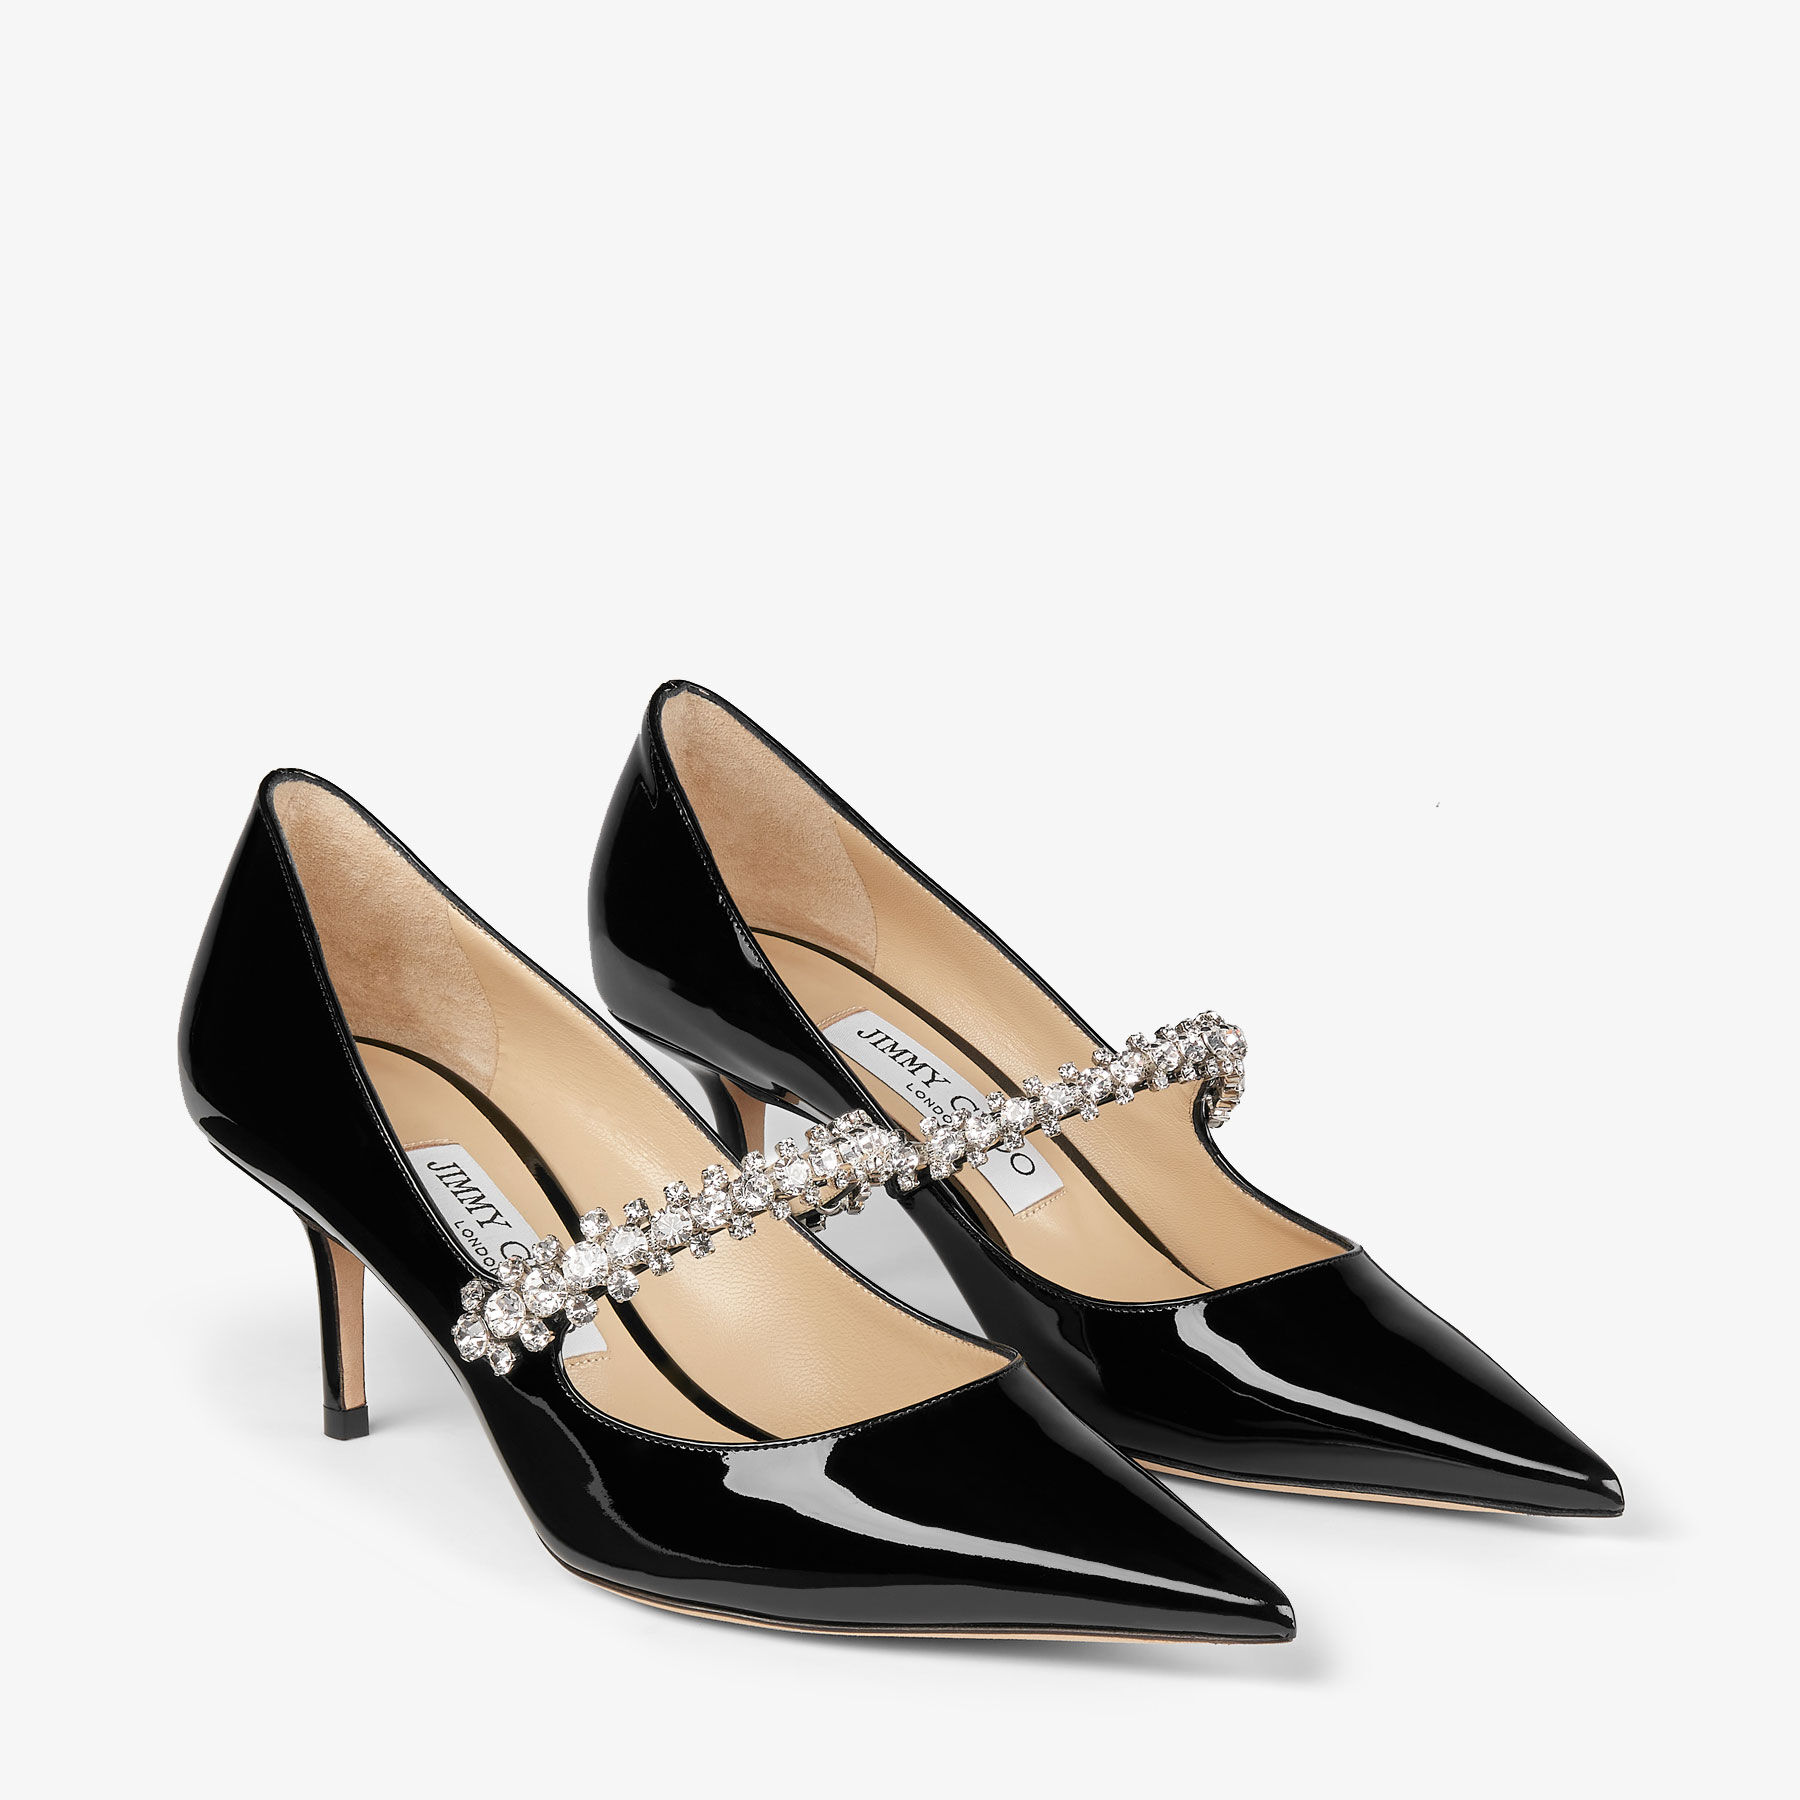 Bing Pump 65 | Black Patent Leather Pumps with crystals | JIMMY CHOO